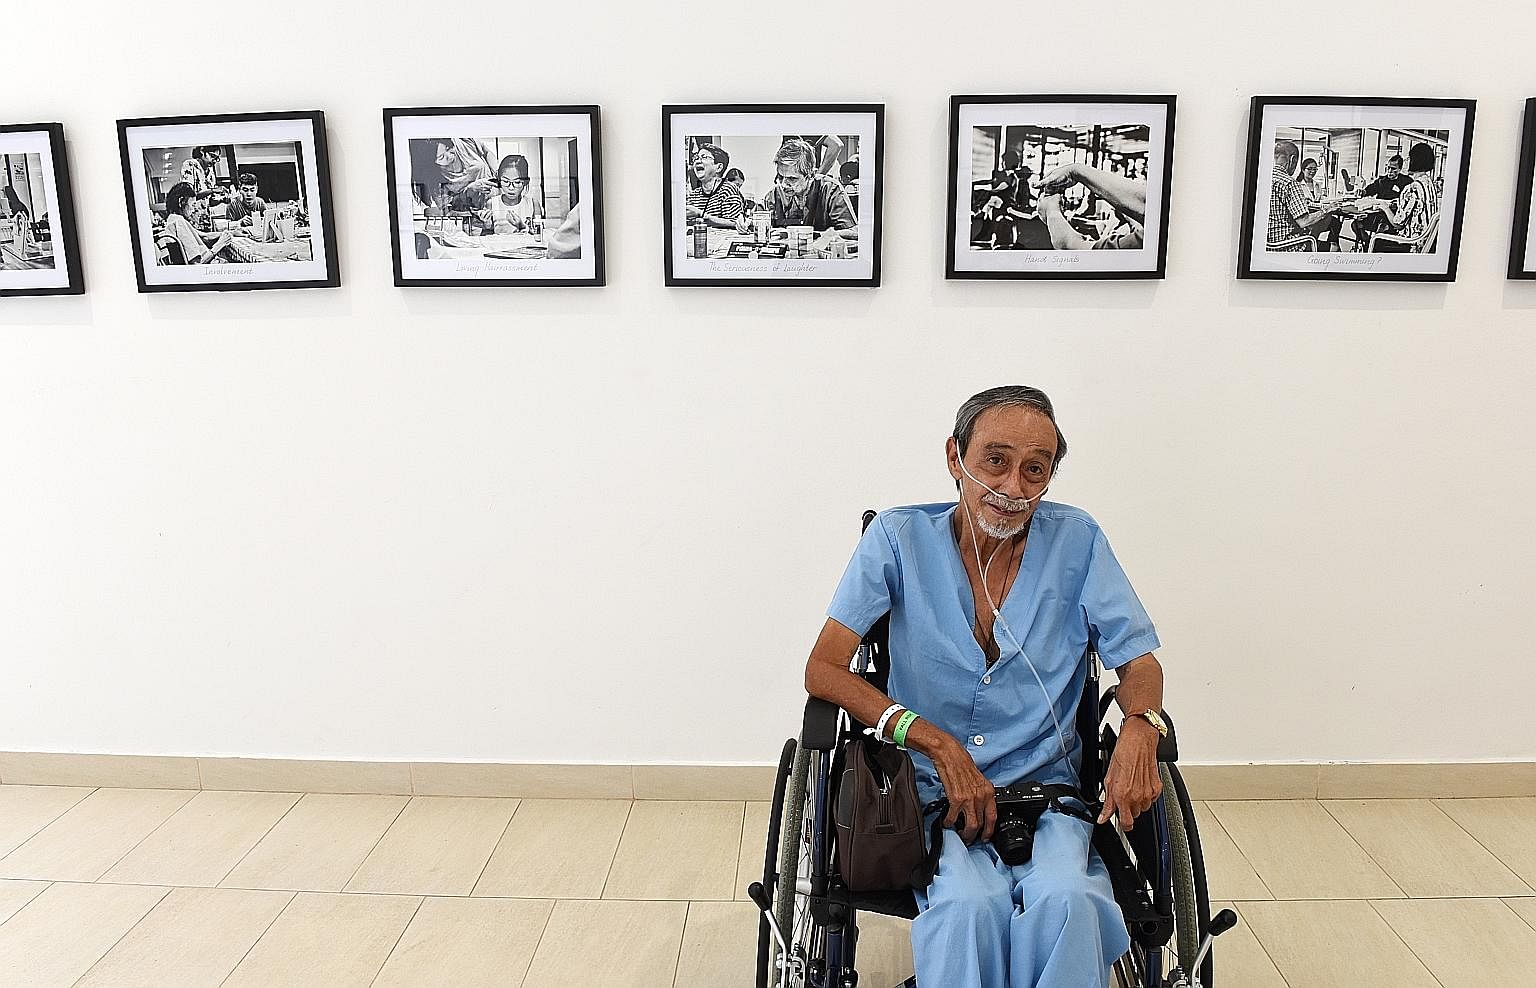 Mr Alan Lee, 69, suffers from end-stage chronic obstructive pulmonary disease, a progressive respiratory disease that causes breathing difficulties. He is spending his last days at the Assisi Hospice. His exhibition of 19 portraits of his fellow pati